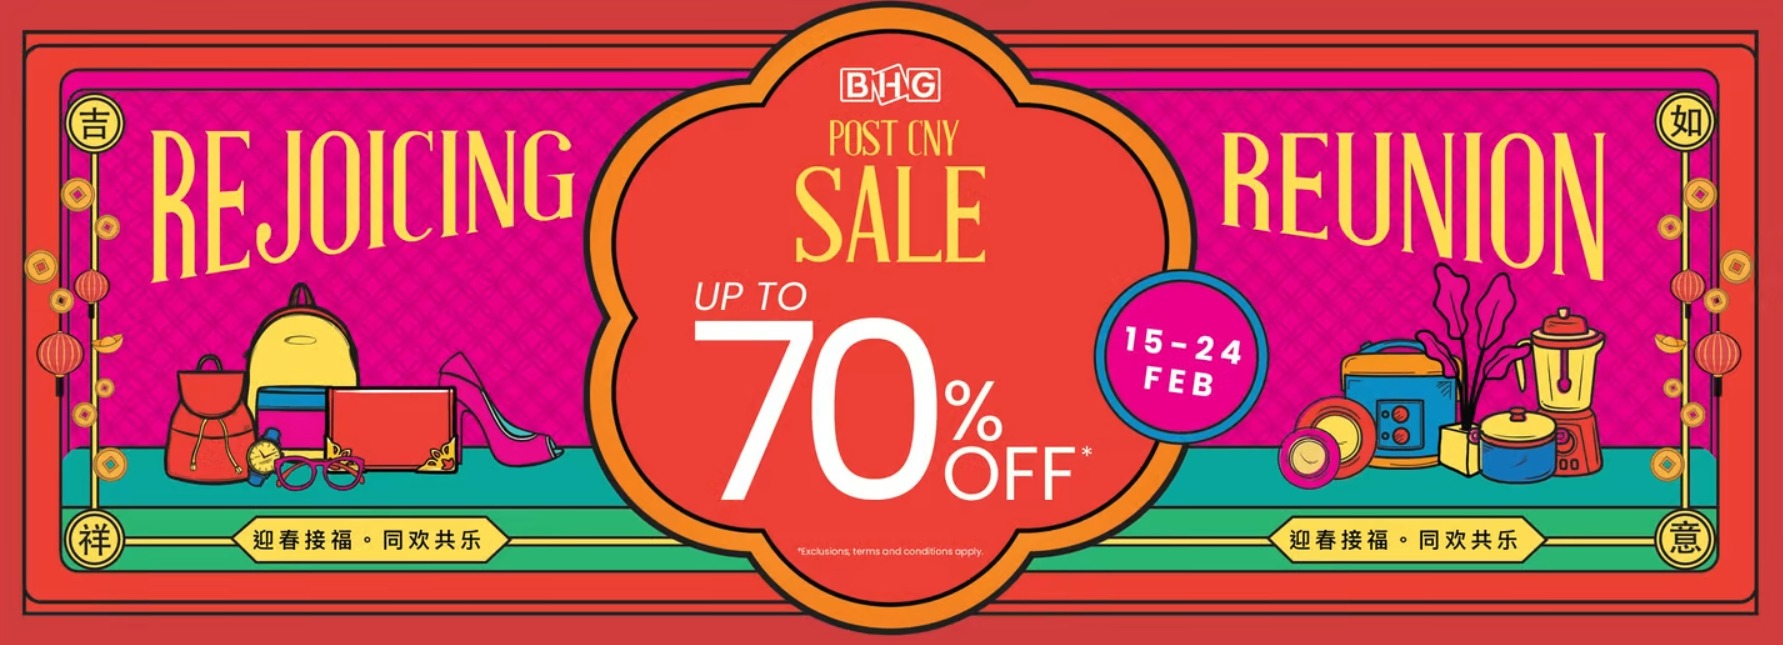 ATT 18-24 Feb 2021: BHG Weekly Promotion: Rejoicing Reunion Up to 70% OFF with POST CNY Sale